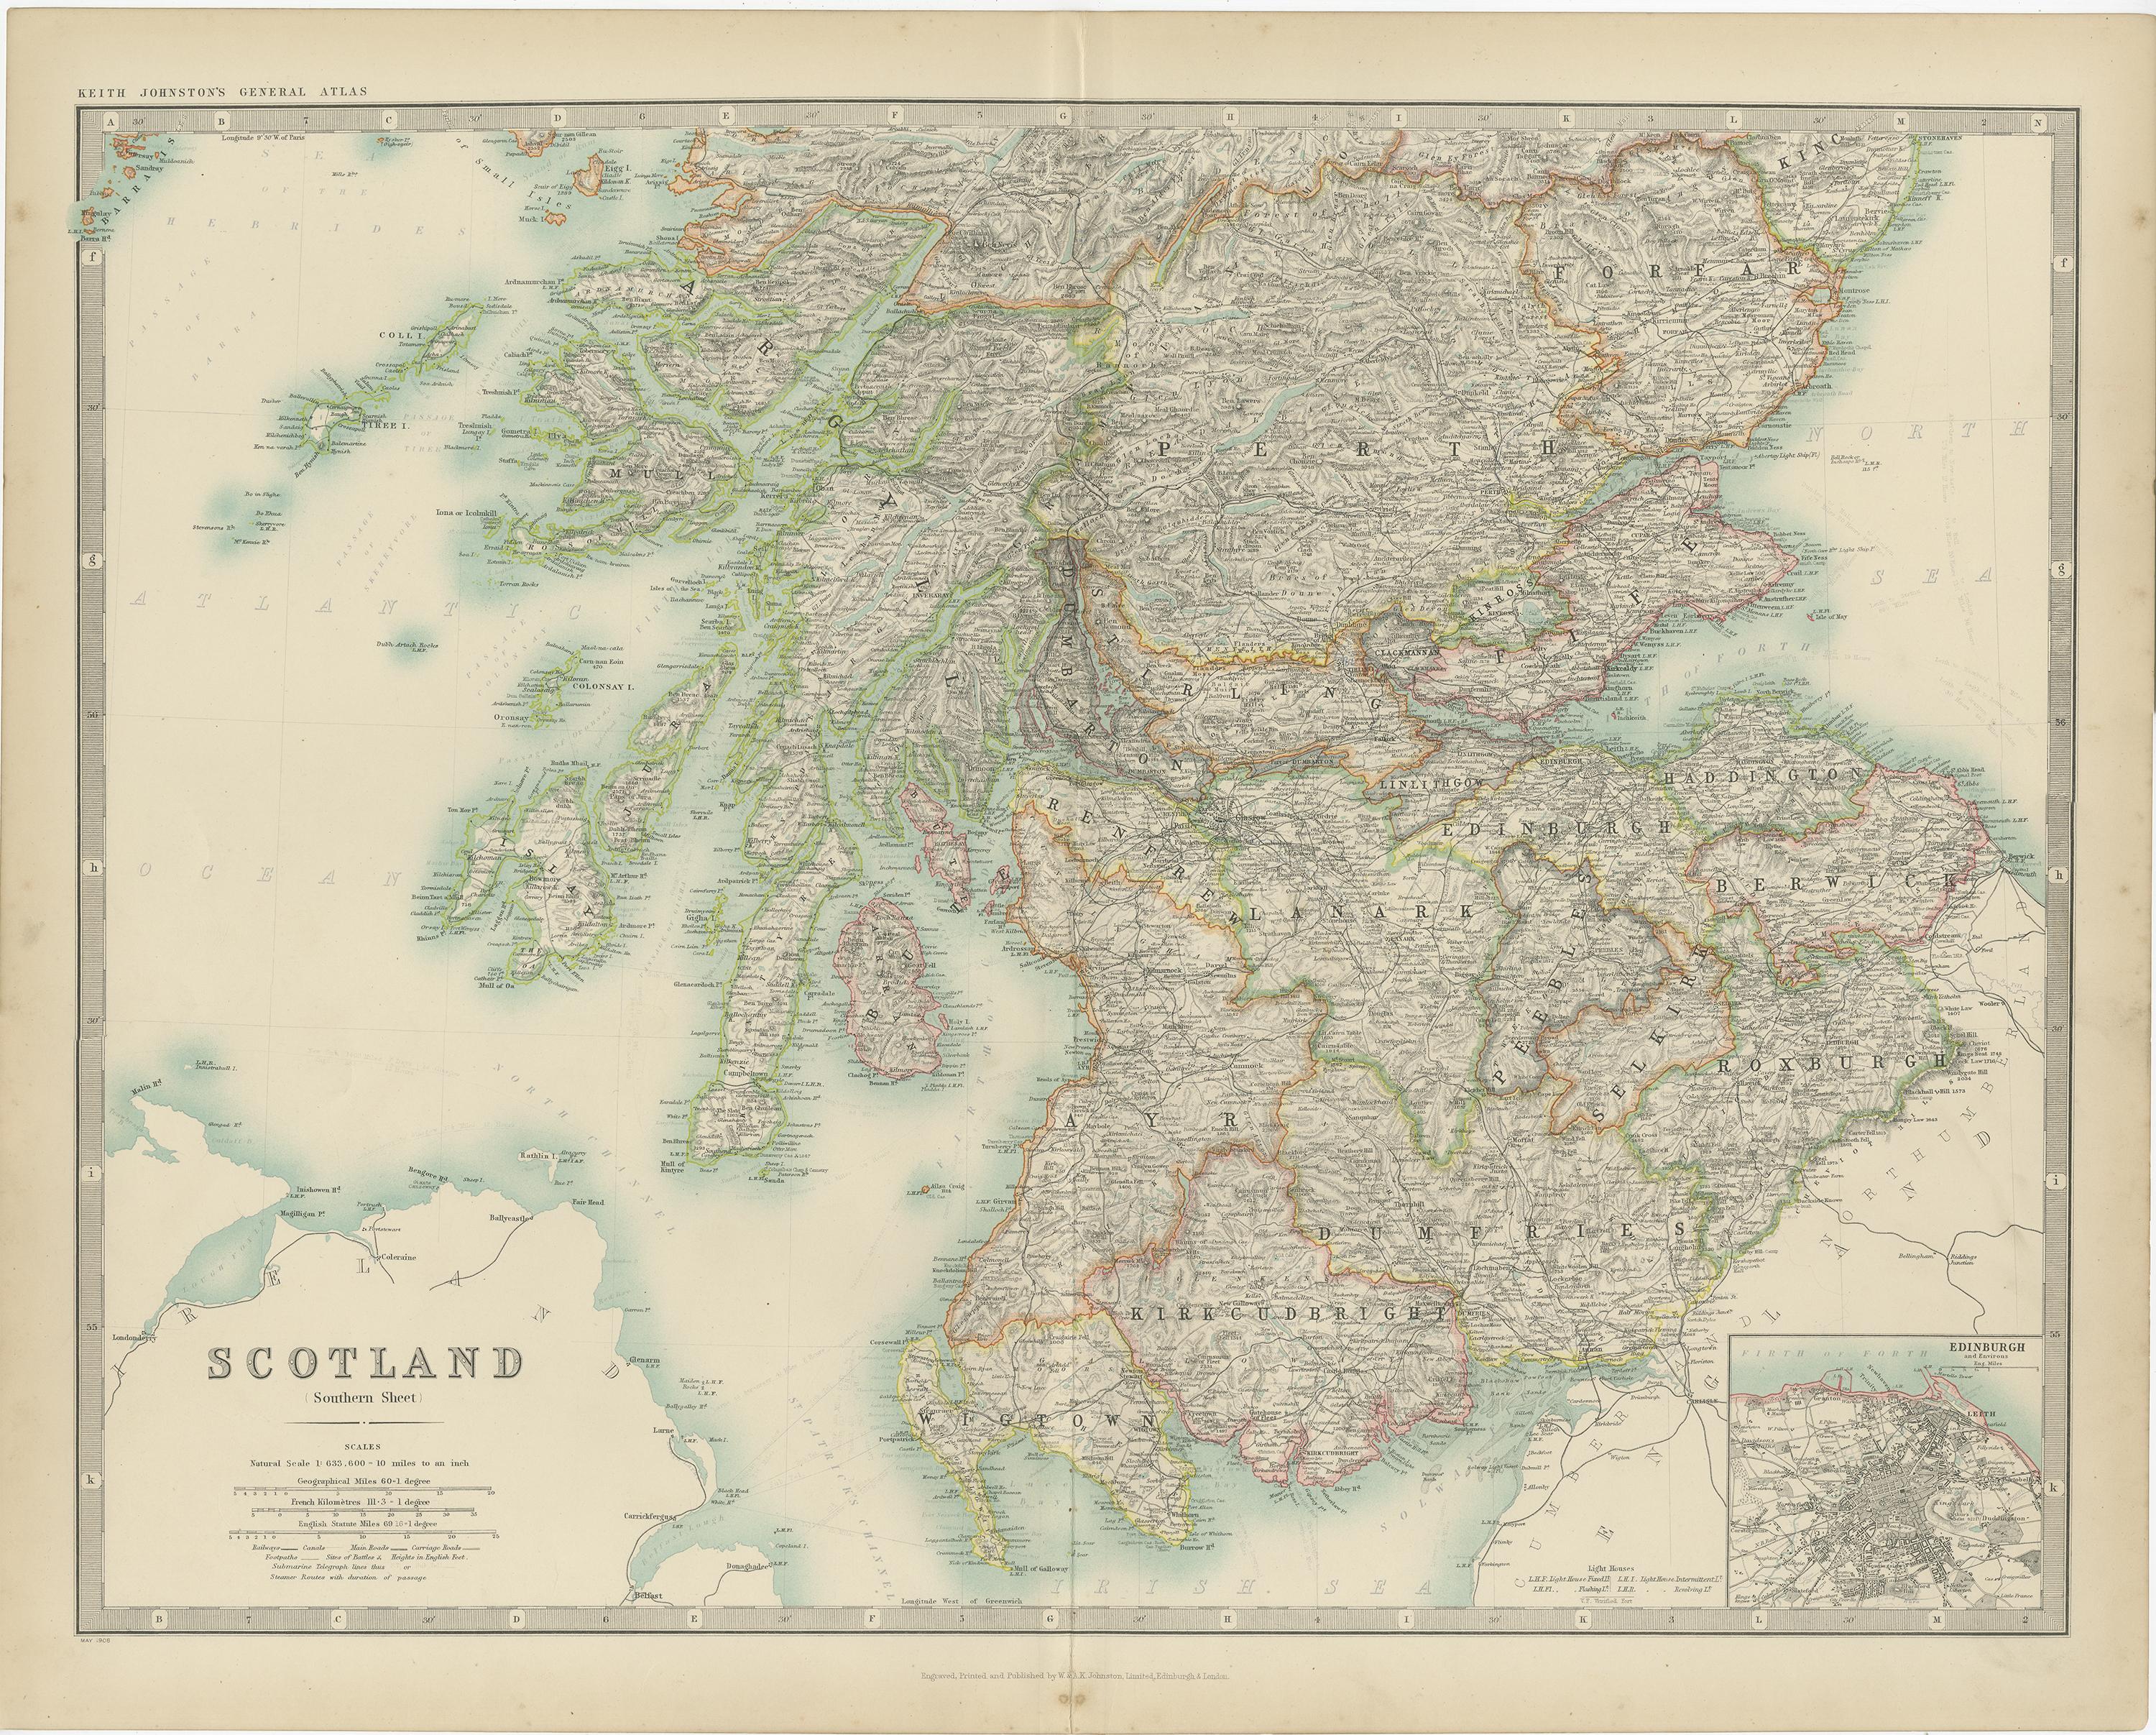 Antique map titled 'Scotland'. Original antique map of Scotland. With inset map of Edinburgh. This map originates from the ‘Royal Atlas of Modern Geography’. Published by W. & A.K. Johnston, 1909.